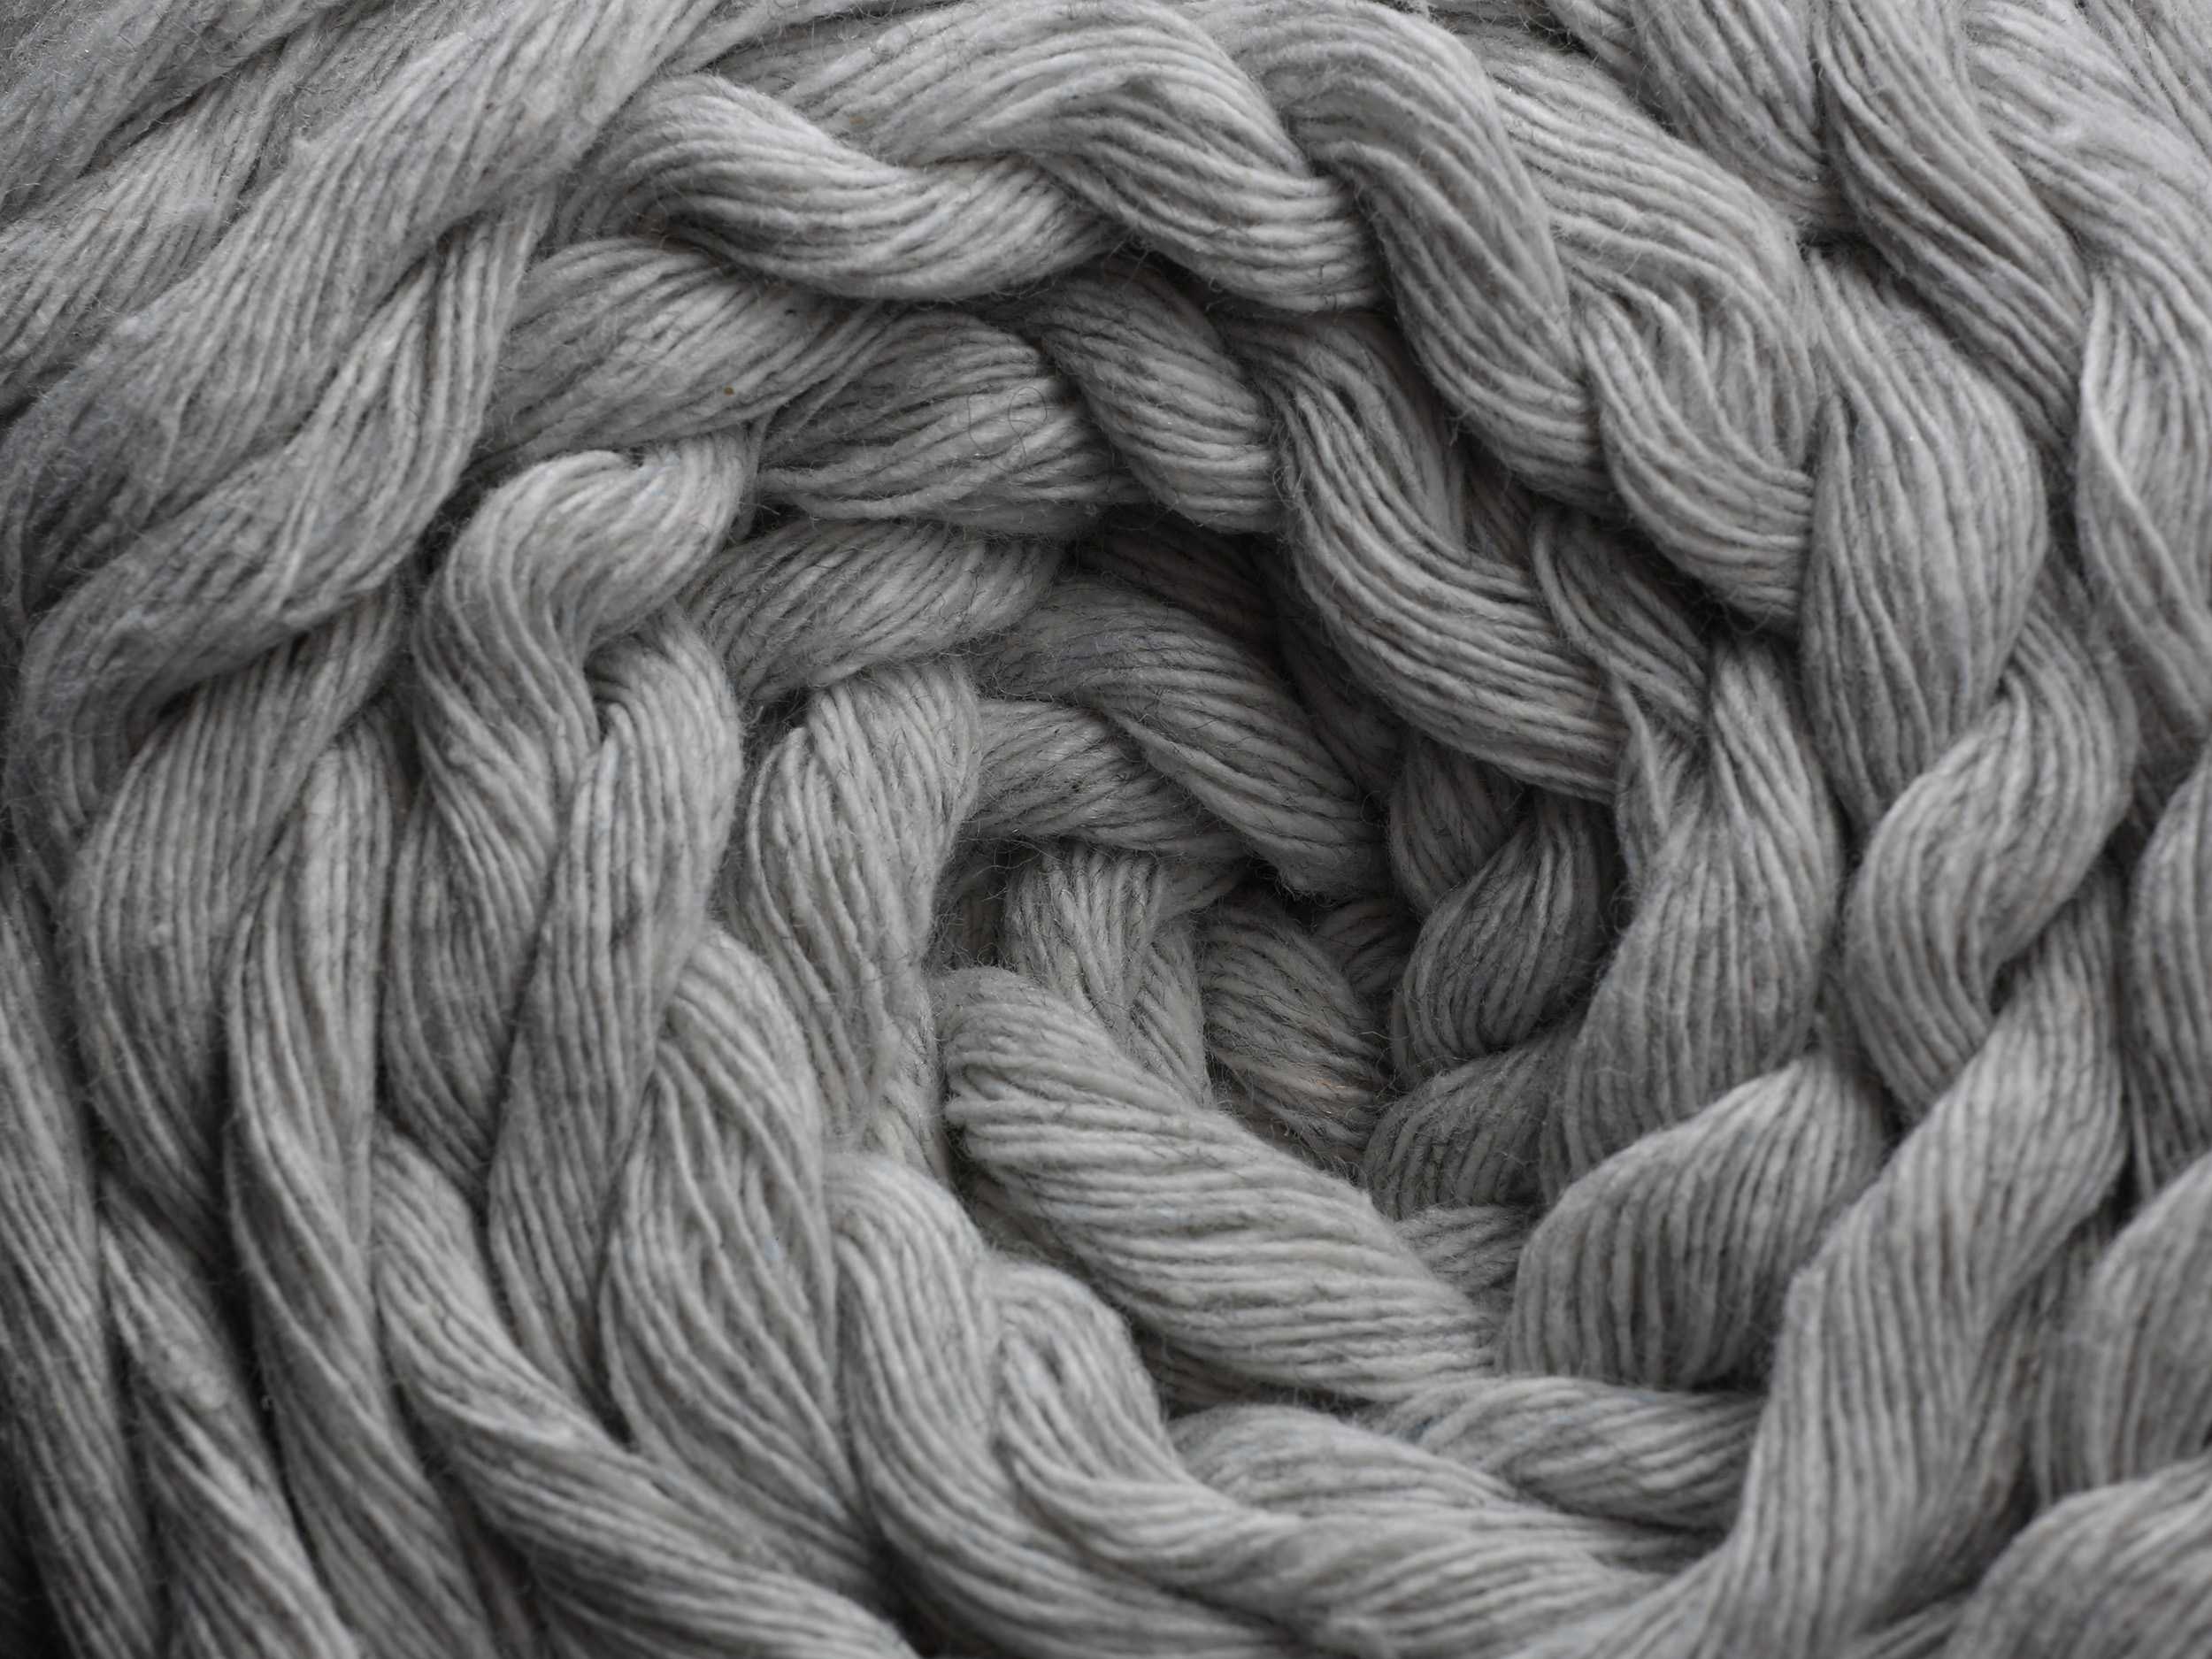 Spiral of wool